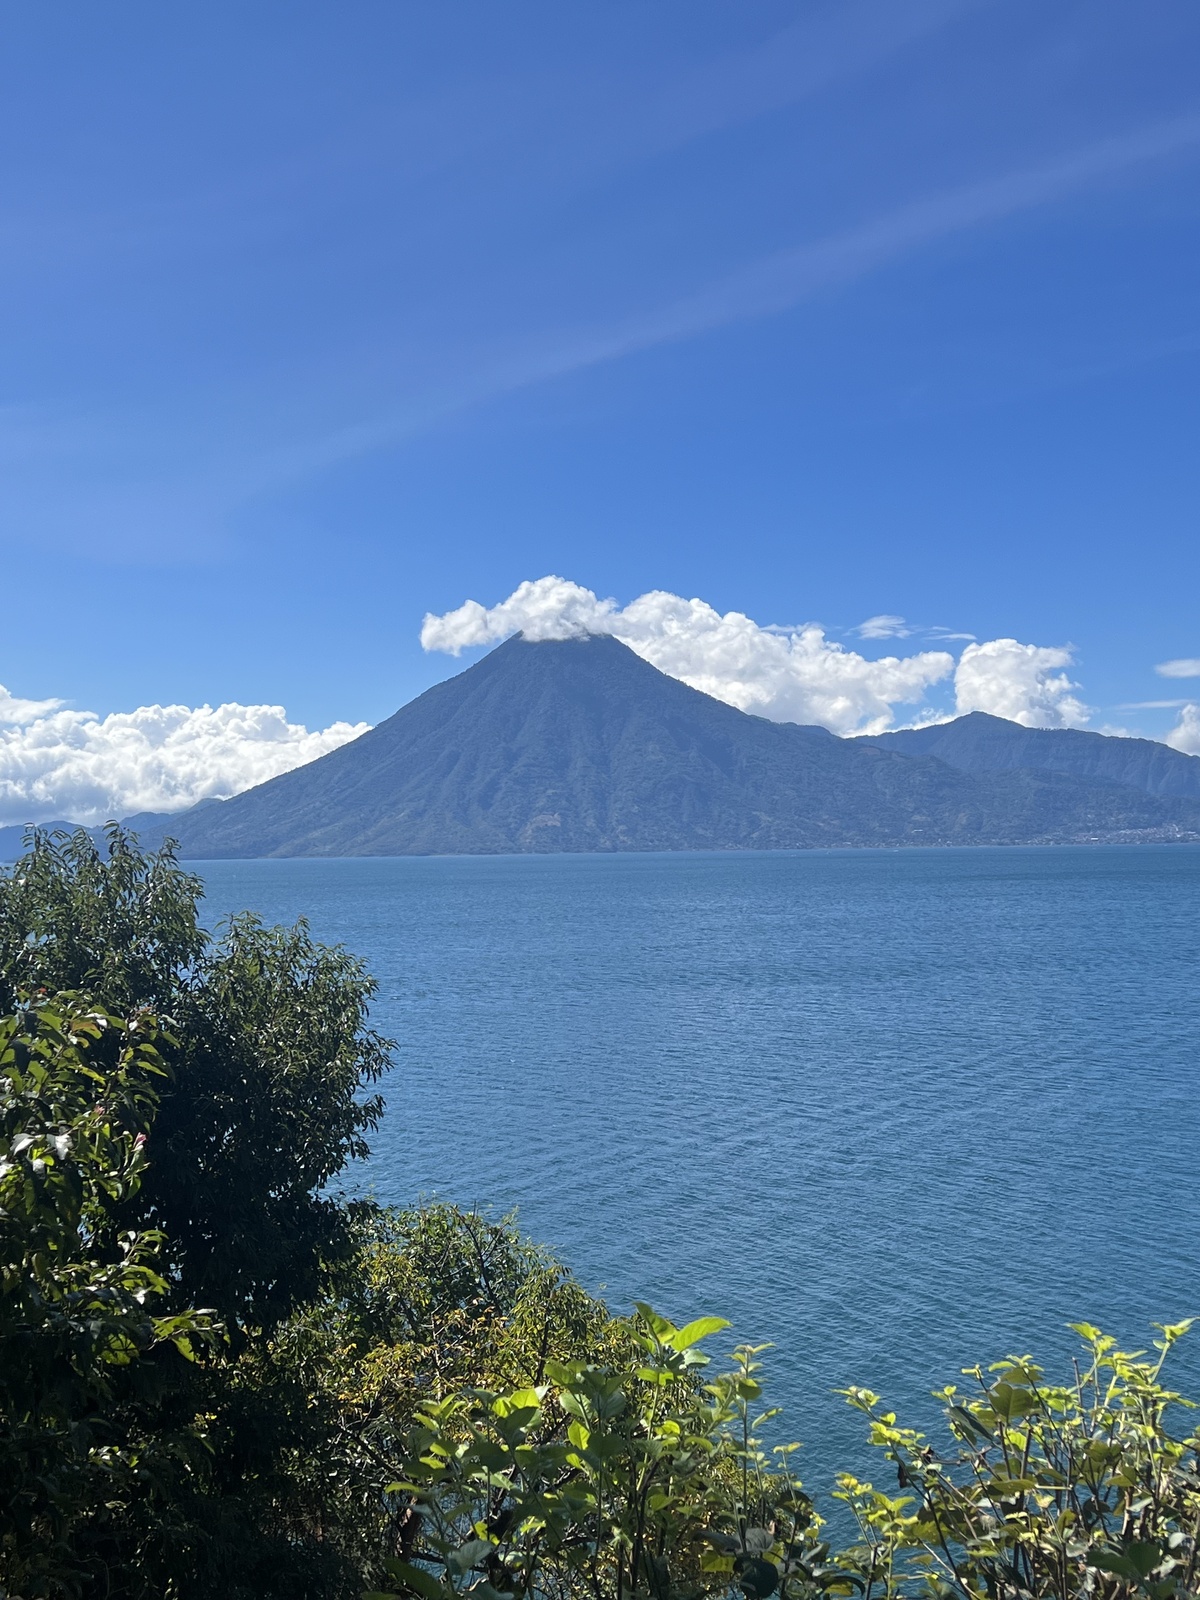 photo of lake atitlan from our room at sunset lodge. shows plants and trees in bottom corner and volcano in background with stunning blue water between the two